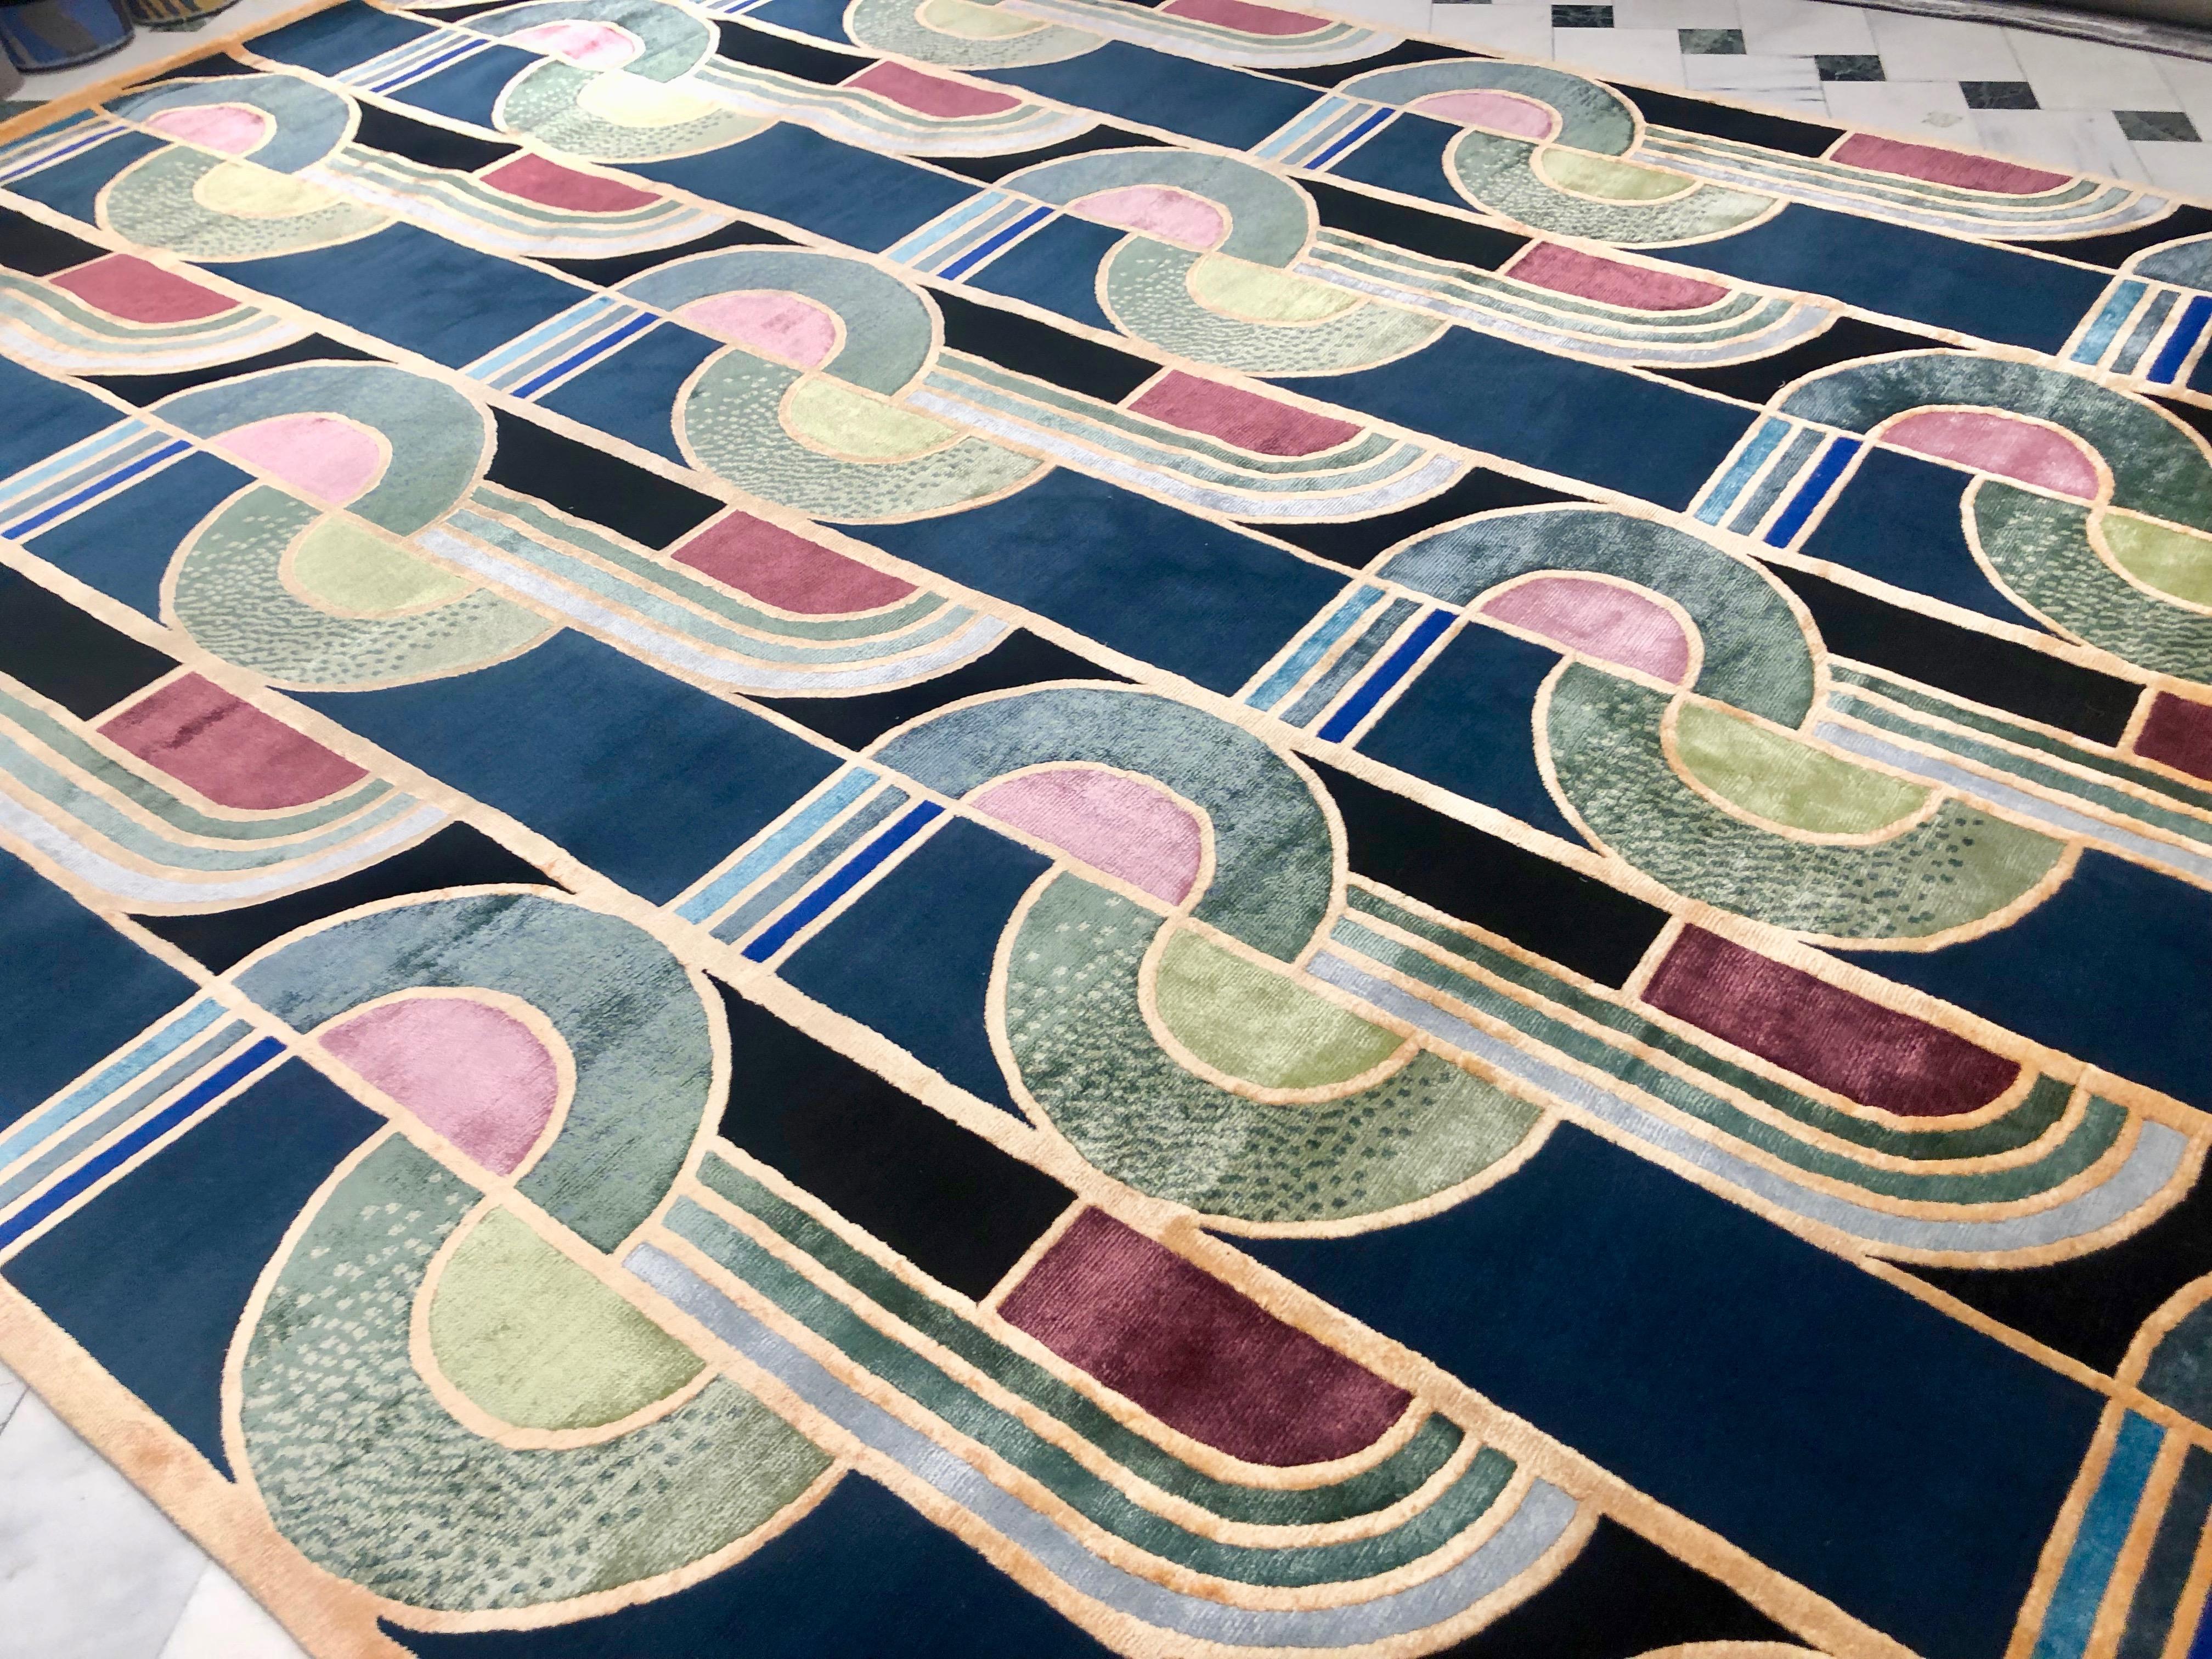 Hand knotted in Nepal by master craftsmen, this rug is part of the Limited Edition collection and designed by Emtivi studio. It boasts a sophisticated combination of curves and lines in vibrant hues obtained with vegetable and mineral dyes and a